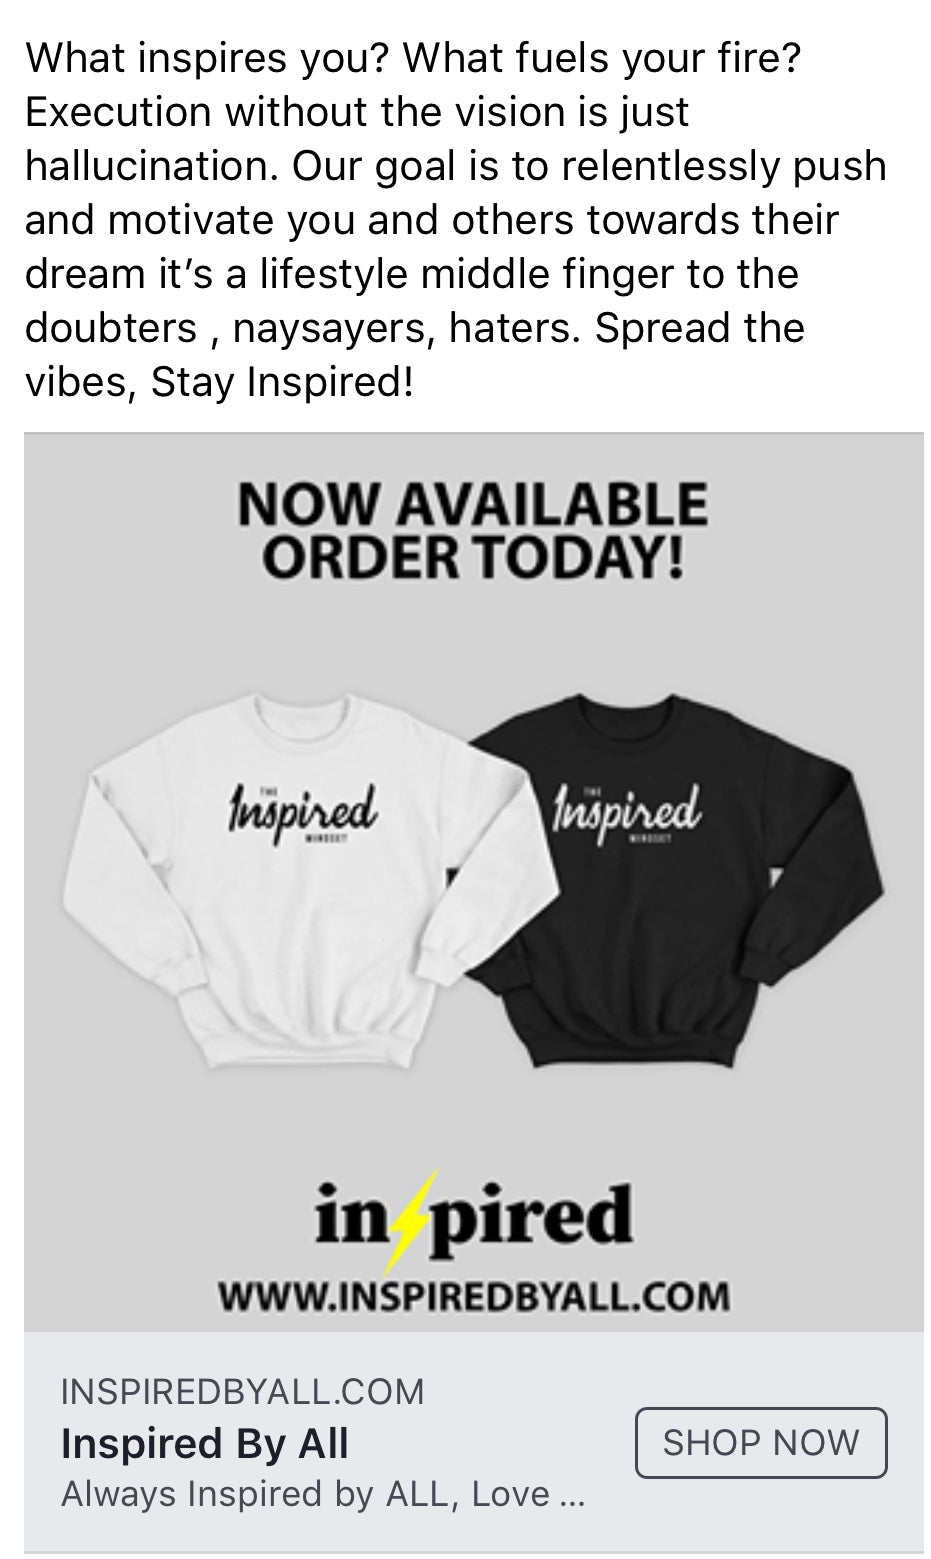 Powerful Messages: Inspired Crewnecks are The Best Get One or Give One